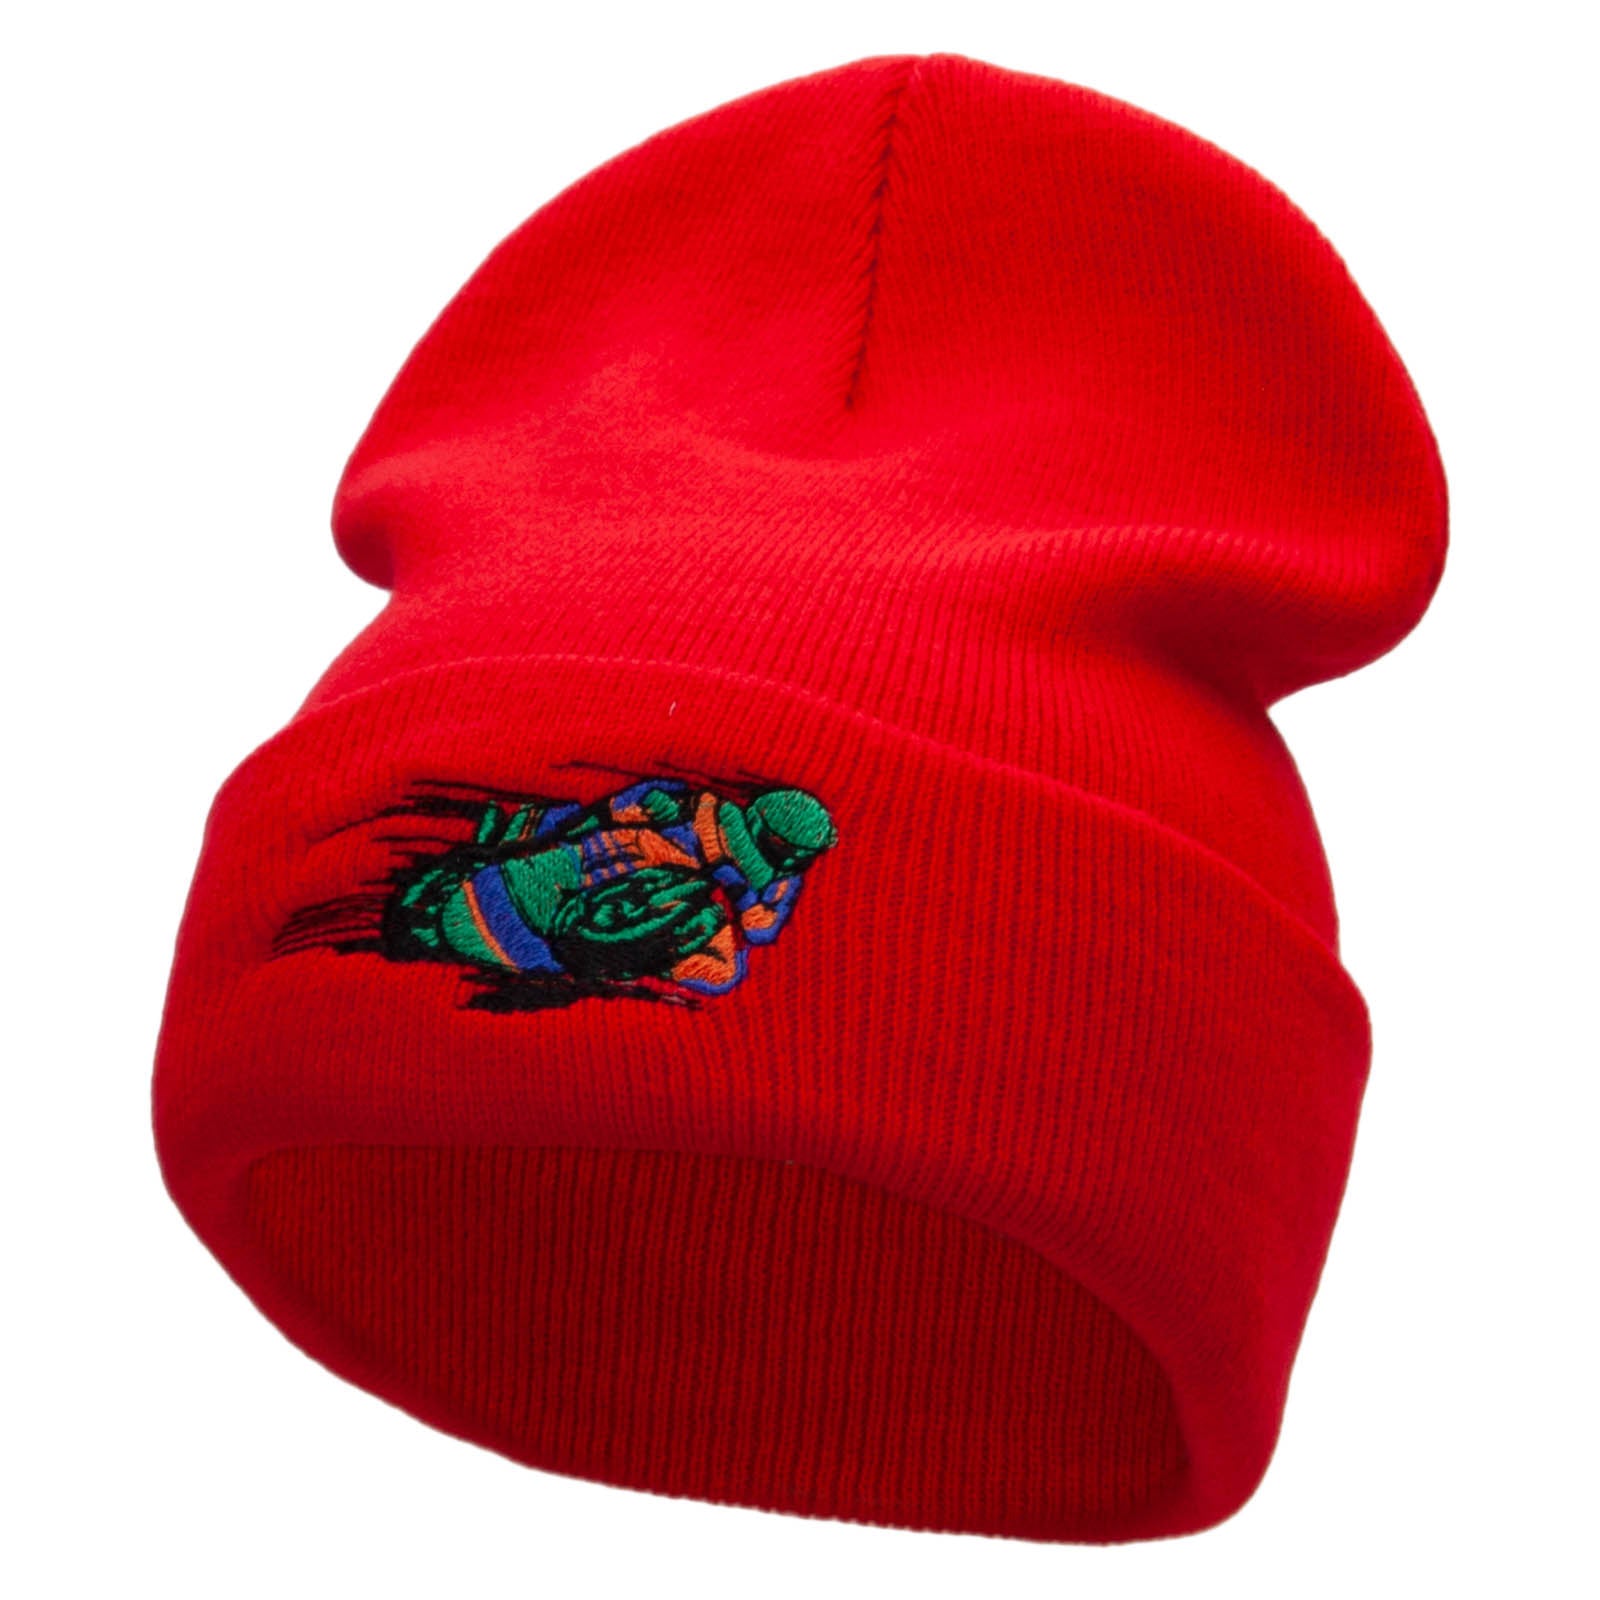 Moto Racer Embroidered 12 Inch Long Knitted Beanie - Red OSFM